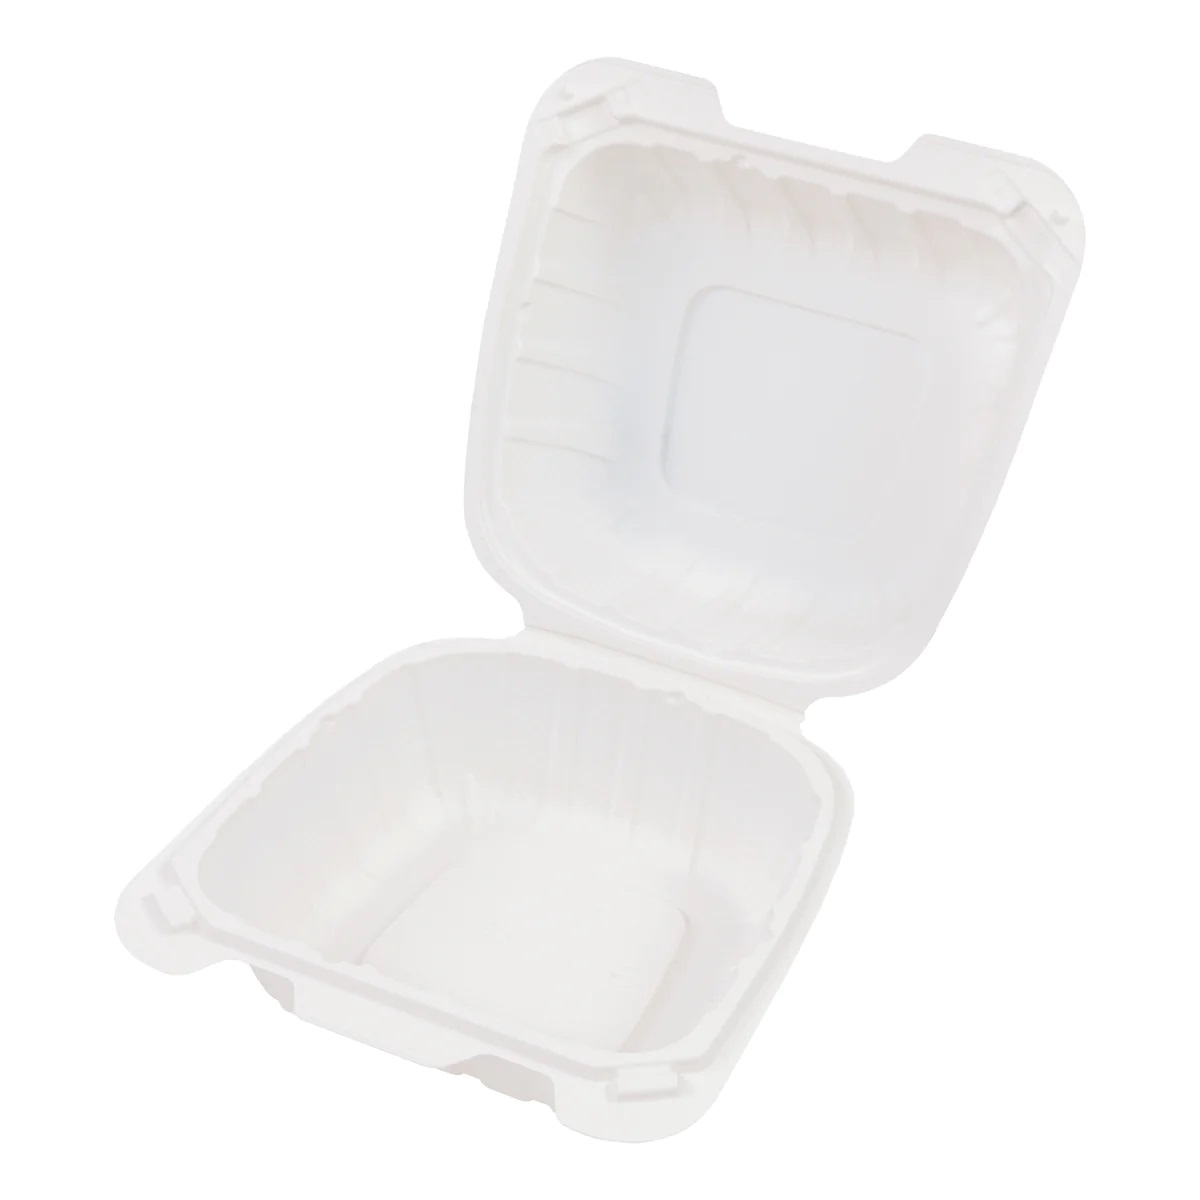 6X6X3 WHITE MINERAL FILLED 
HINGED PP CONTAINER 300/CS